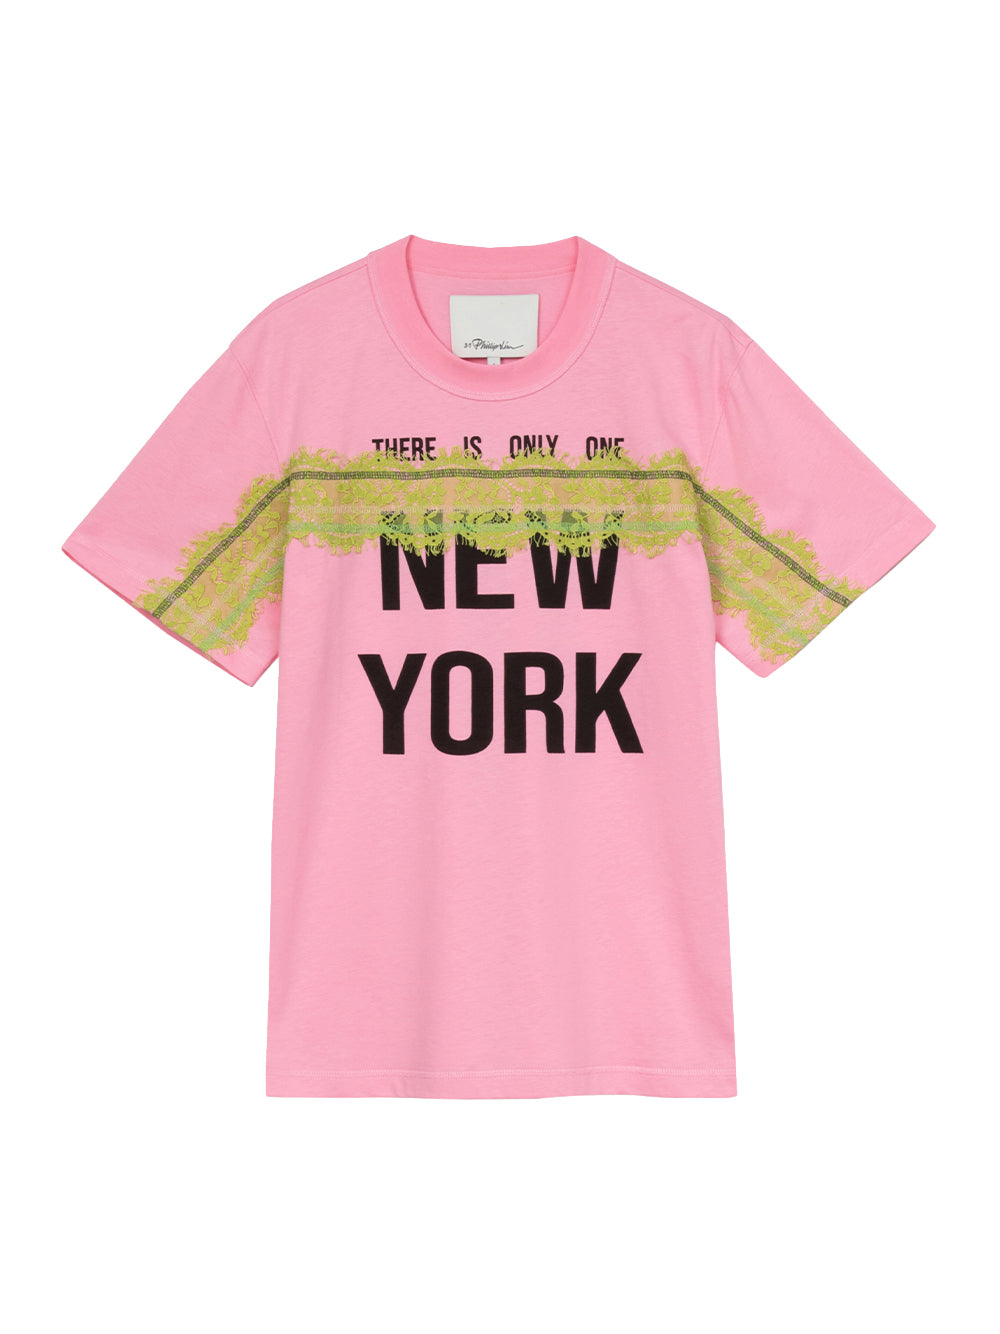 3.1Philliplim-There-Is-Only-One-Ny-Classic-Tee-pink-1